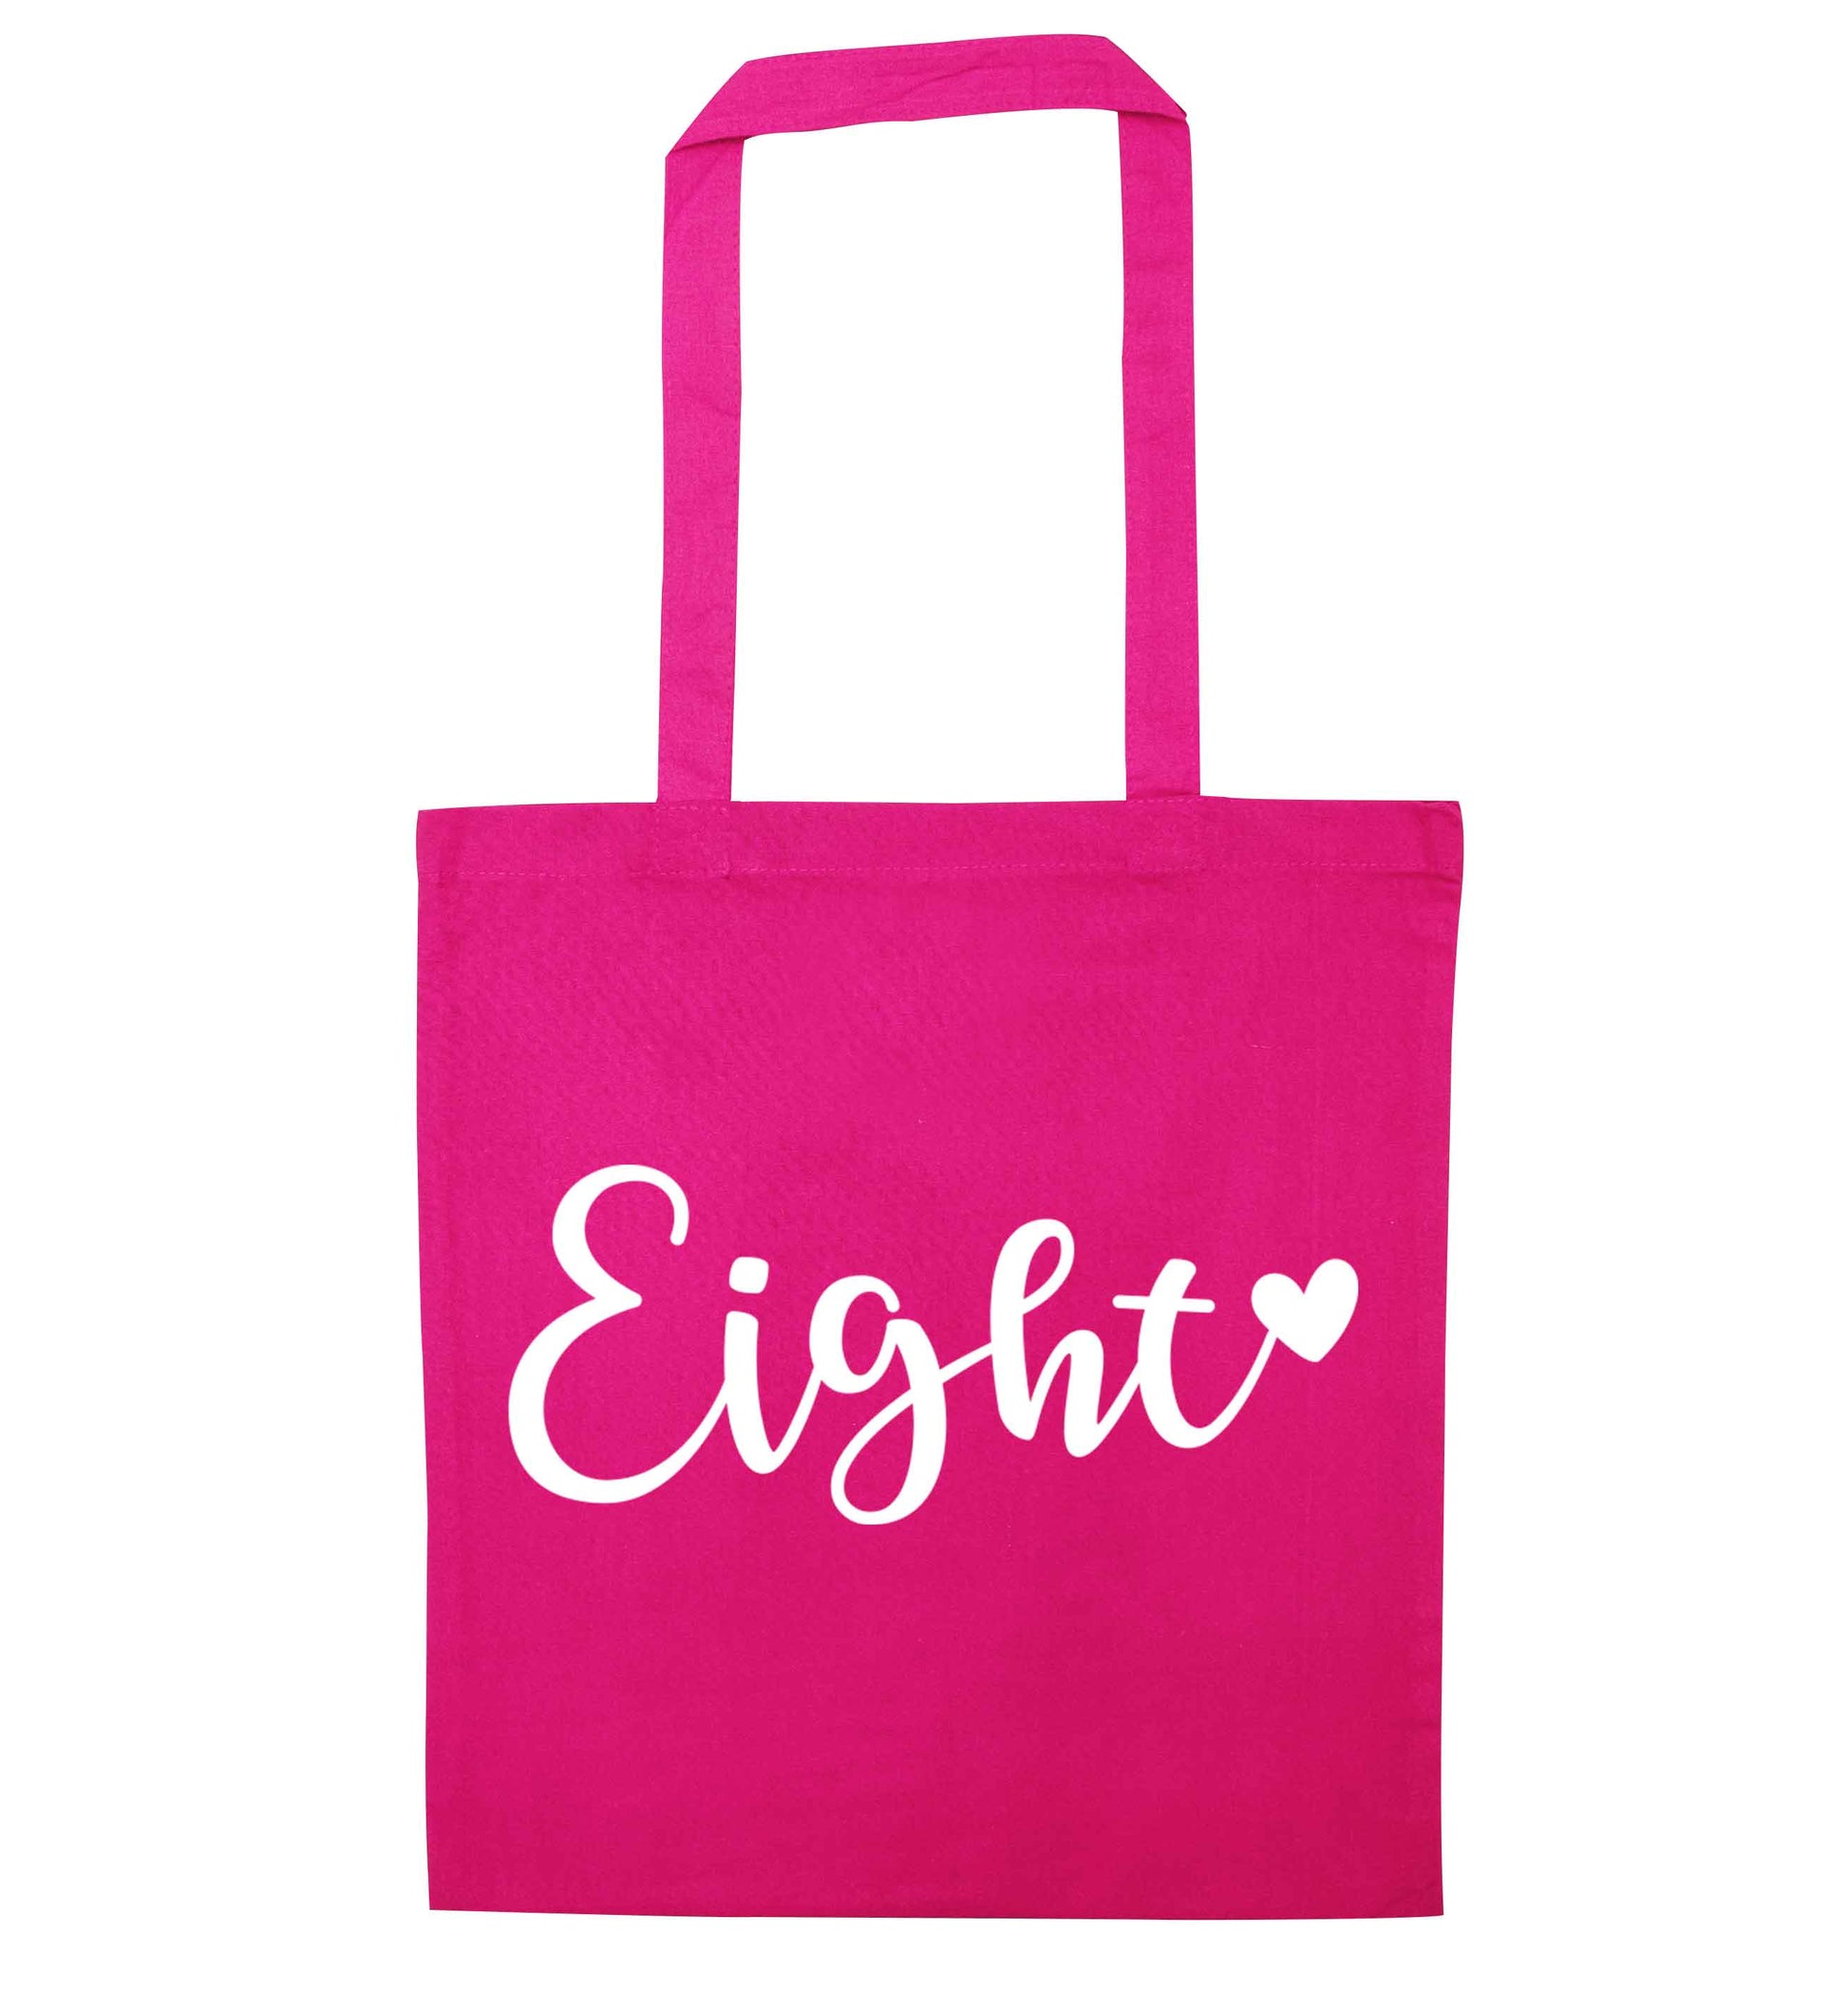 Eight and heart pink tote bag